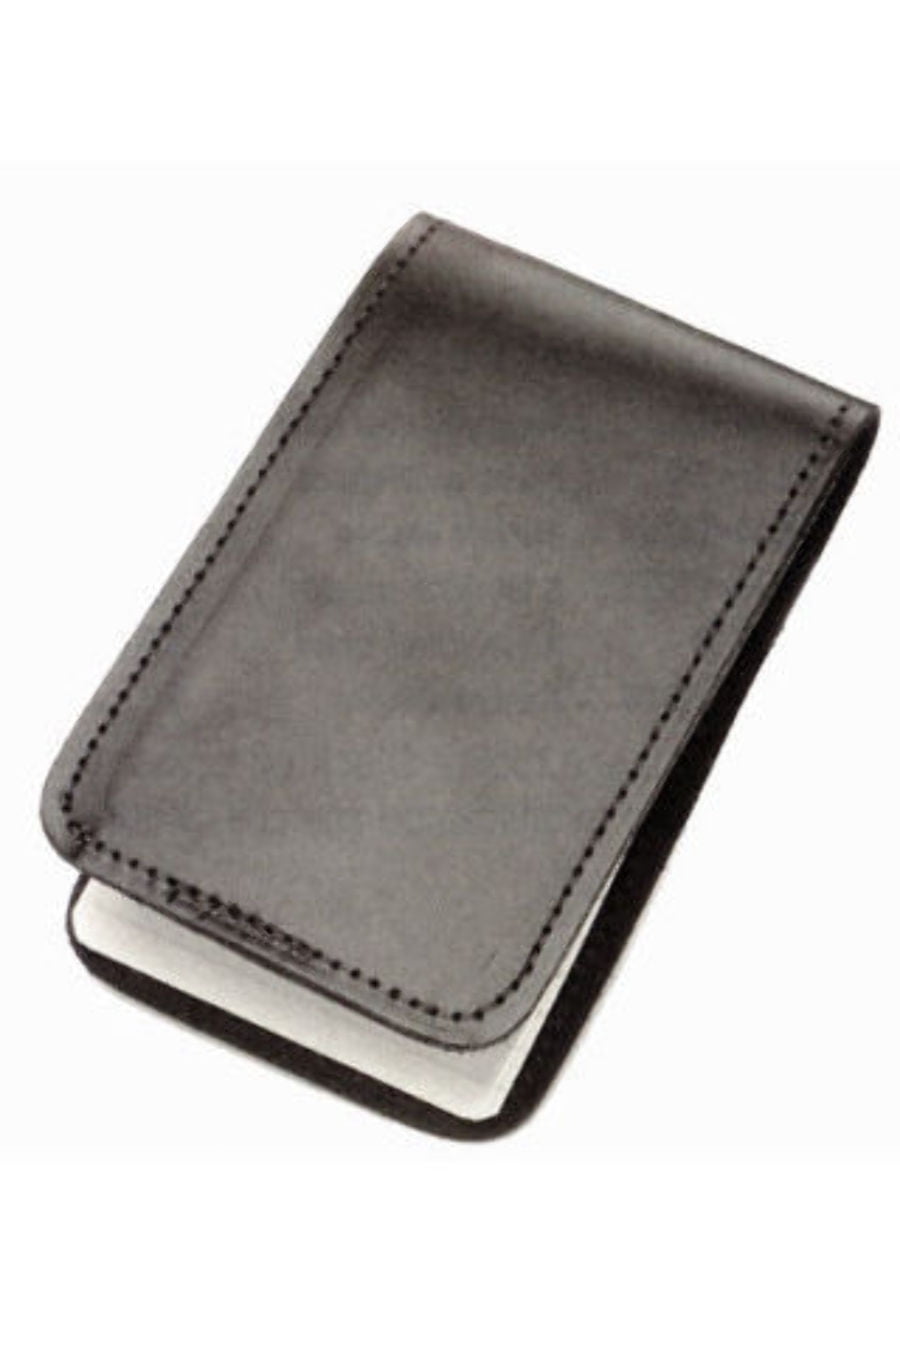 HWC LEATHER POCKET 3X5 MEMO BOOK COVER NOTE PAD HOLDER - PLAIN